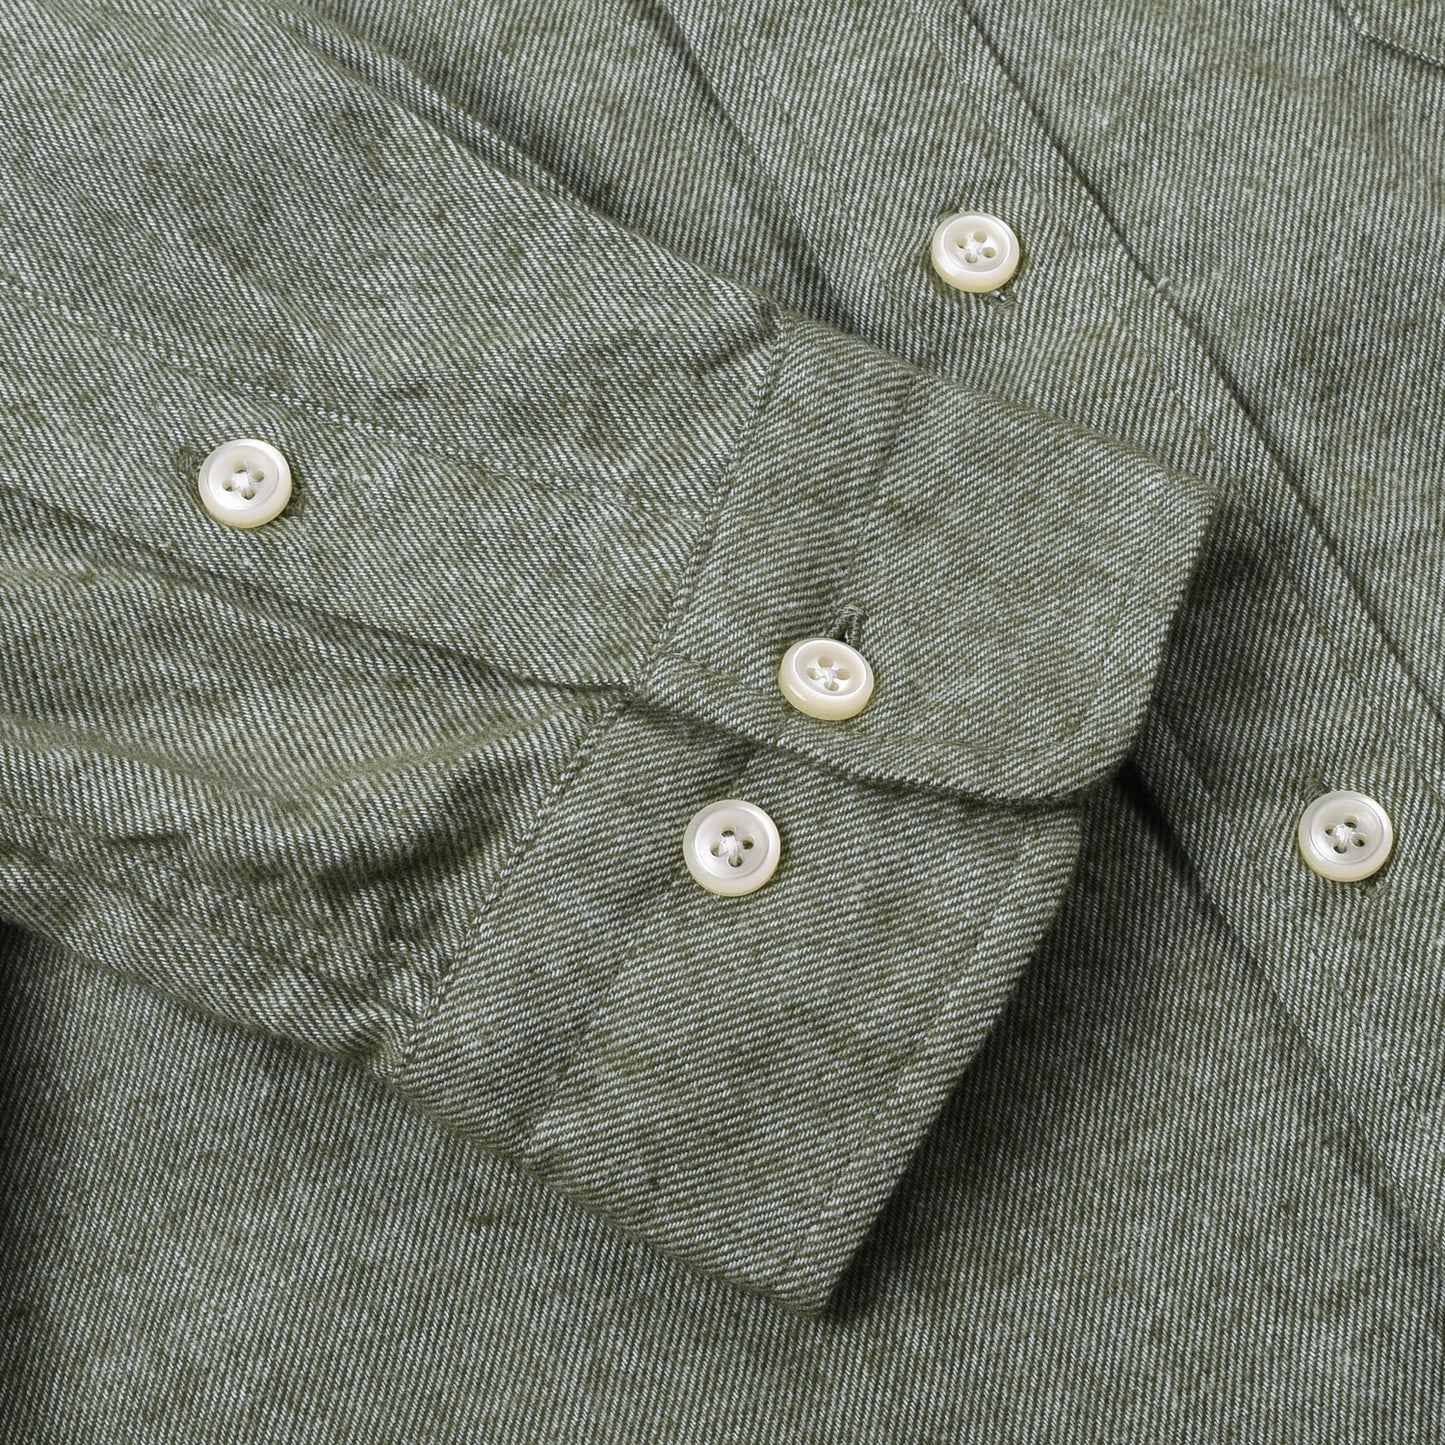 TS(S) CHAMBRAY FLANNEL BAGGY FIT SHIRT - GREEN